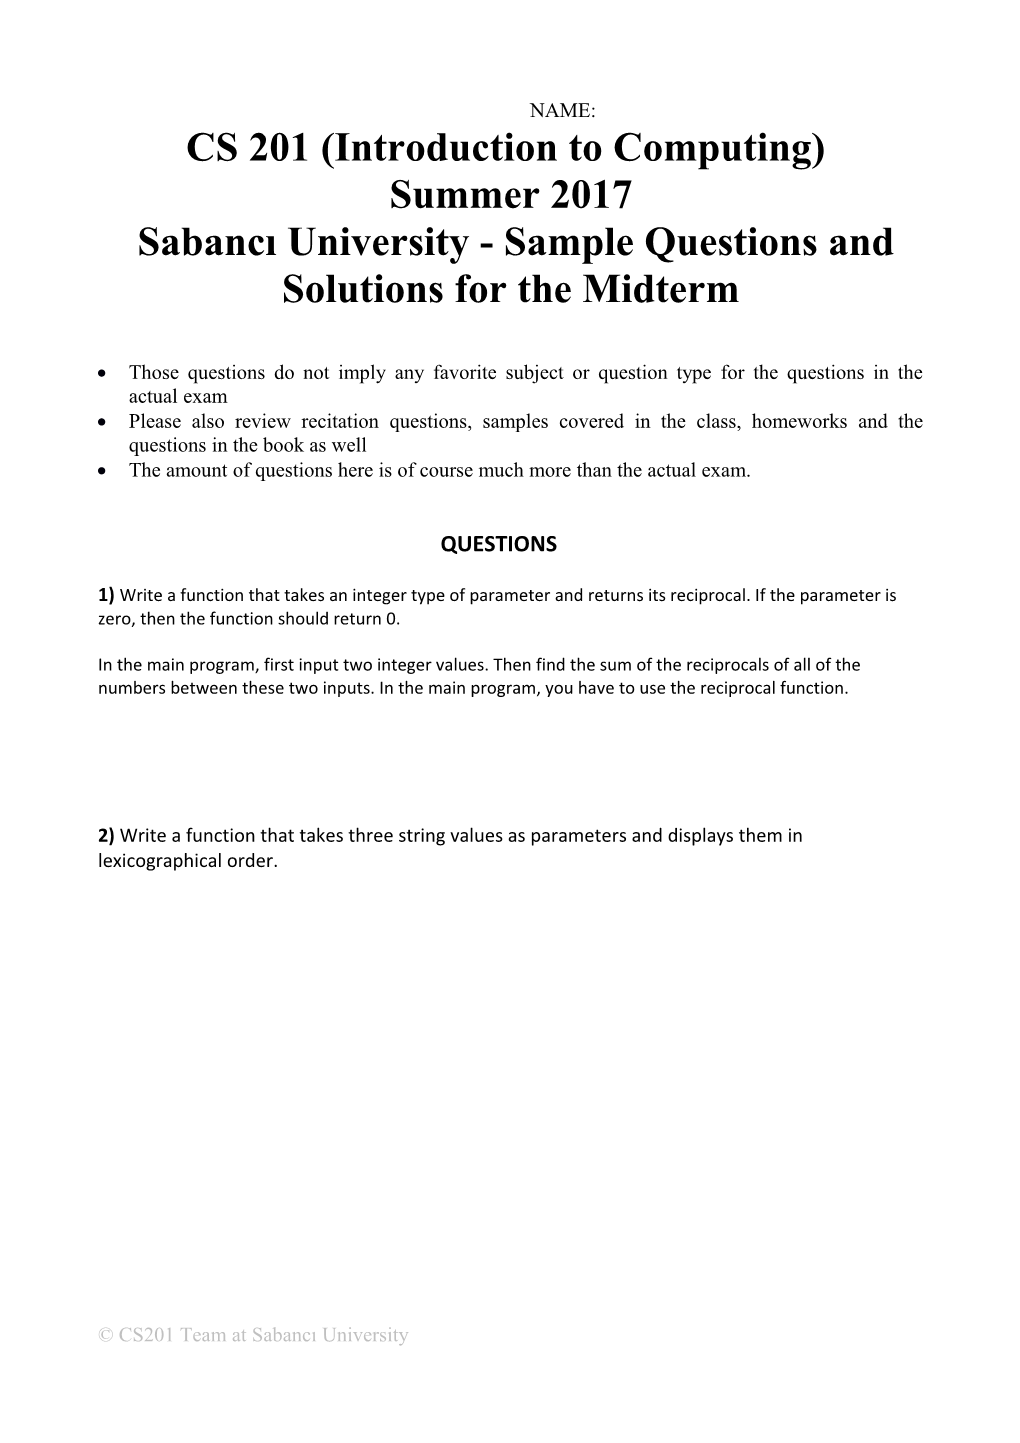 Sabancı University - Sample Questions and Solutions for the Midterm